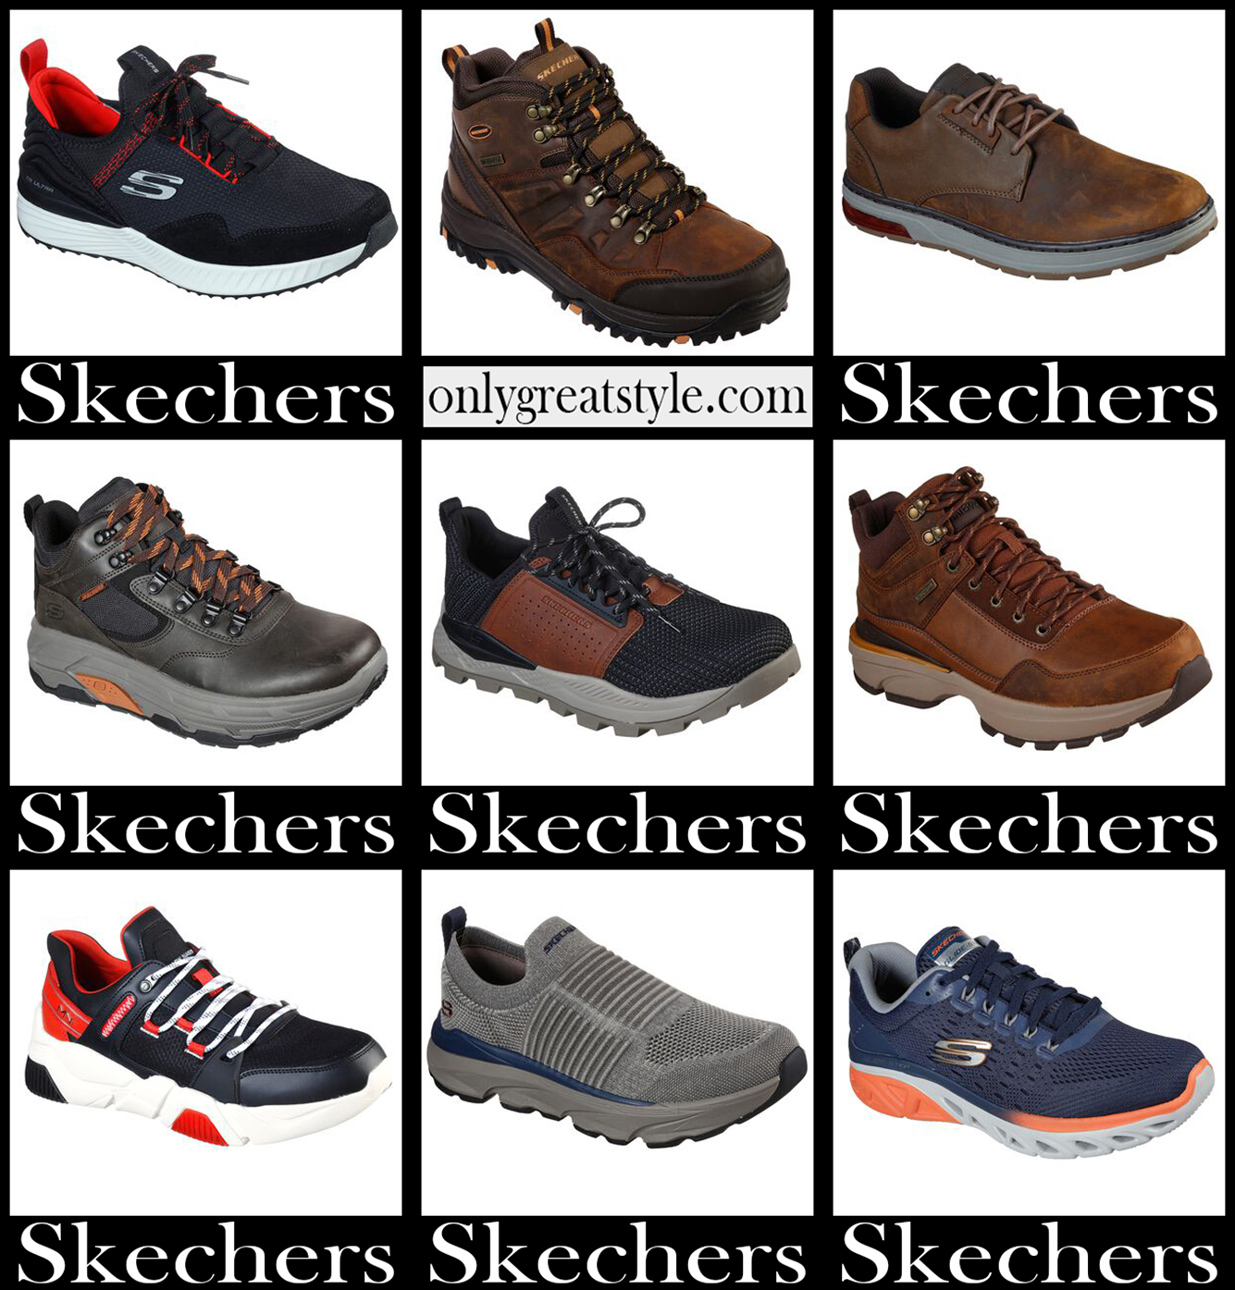 new skechers shoes